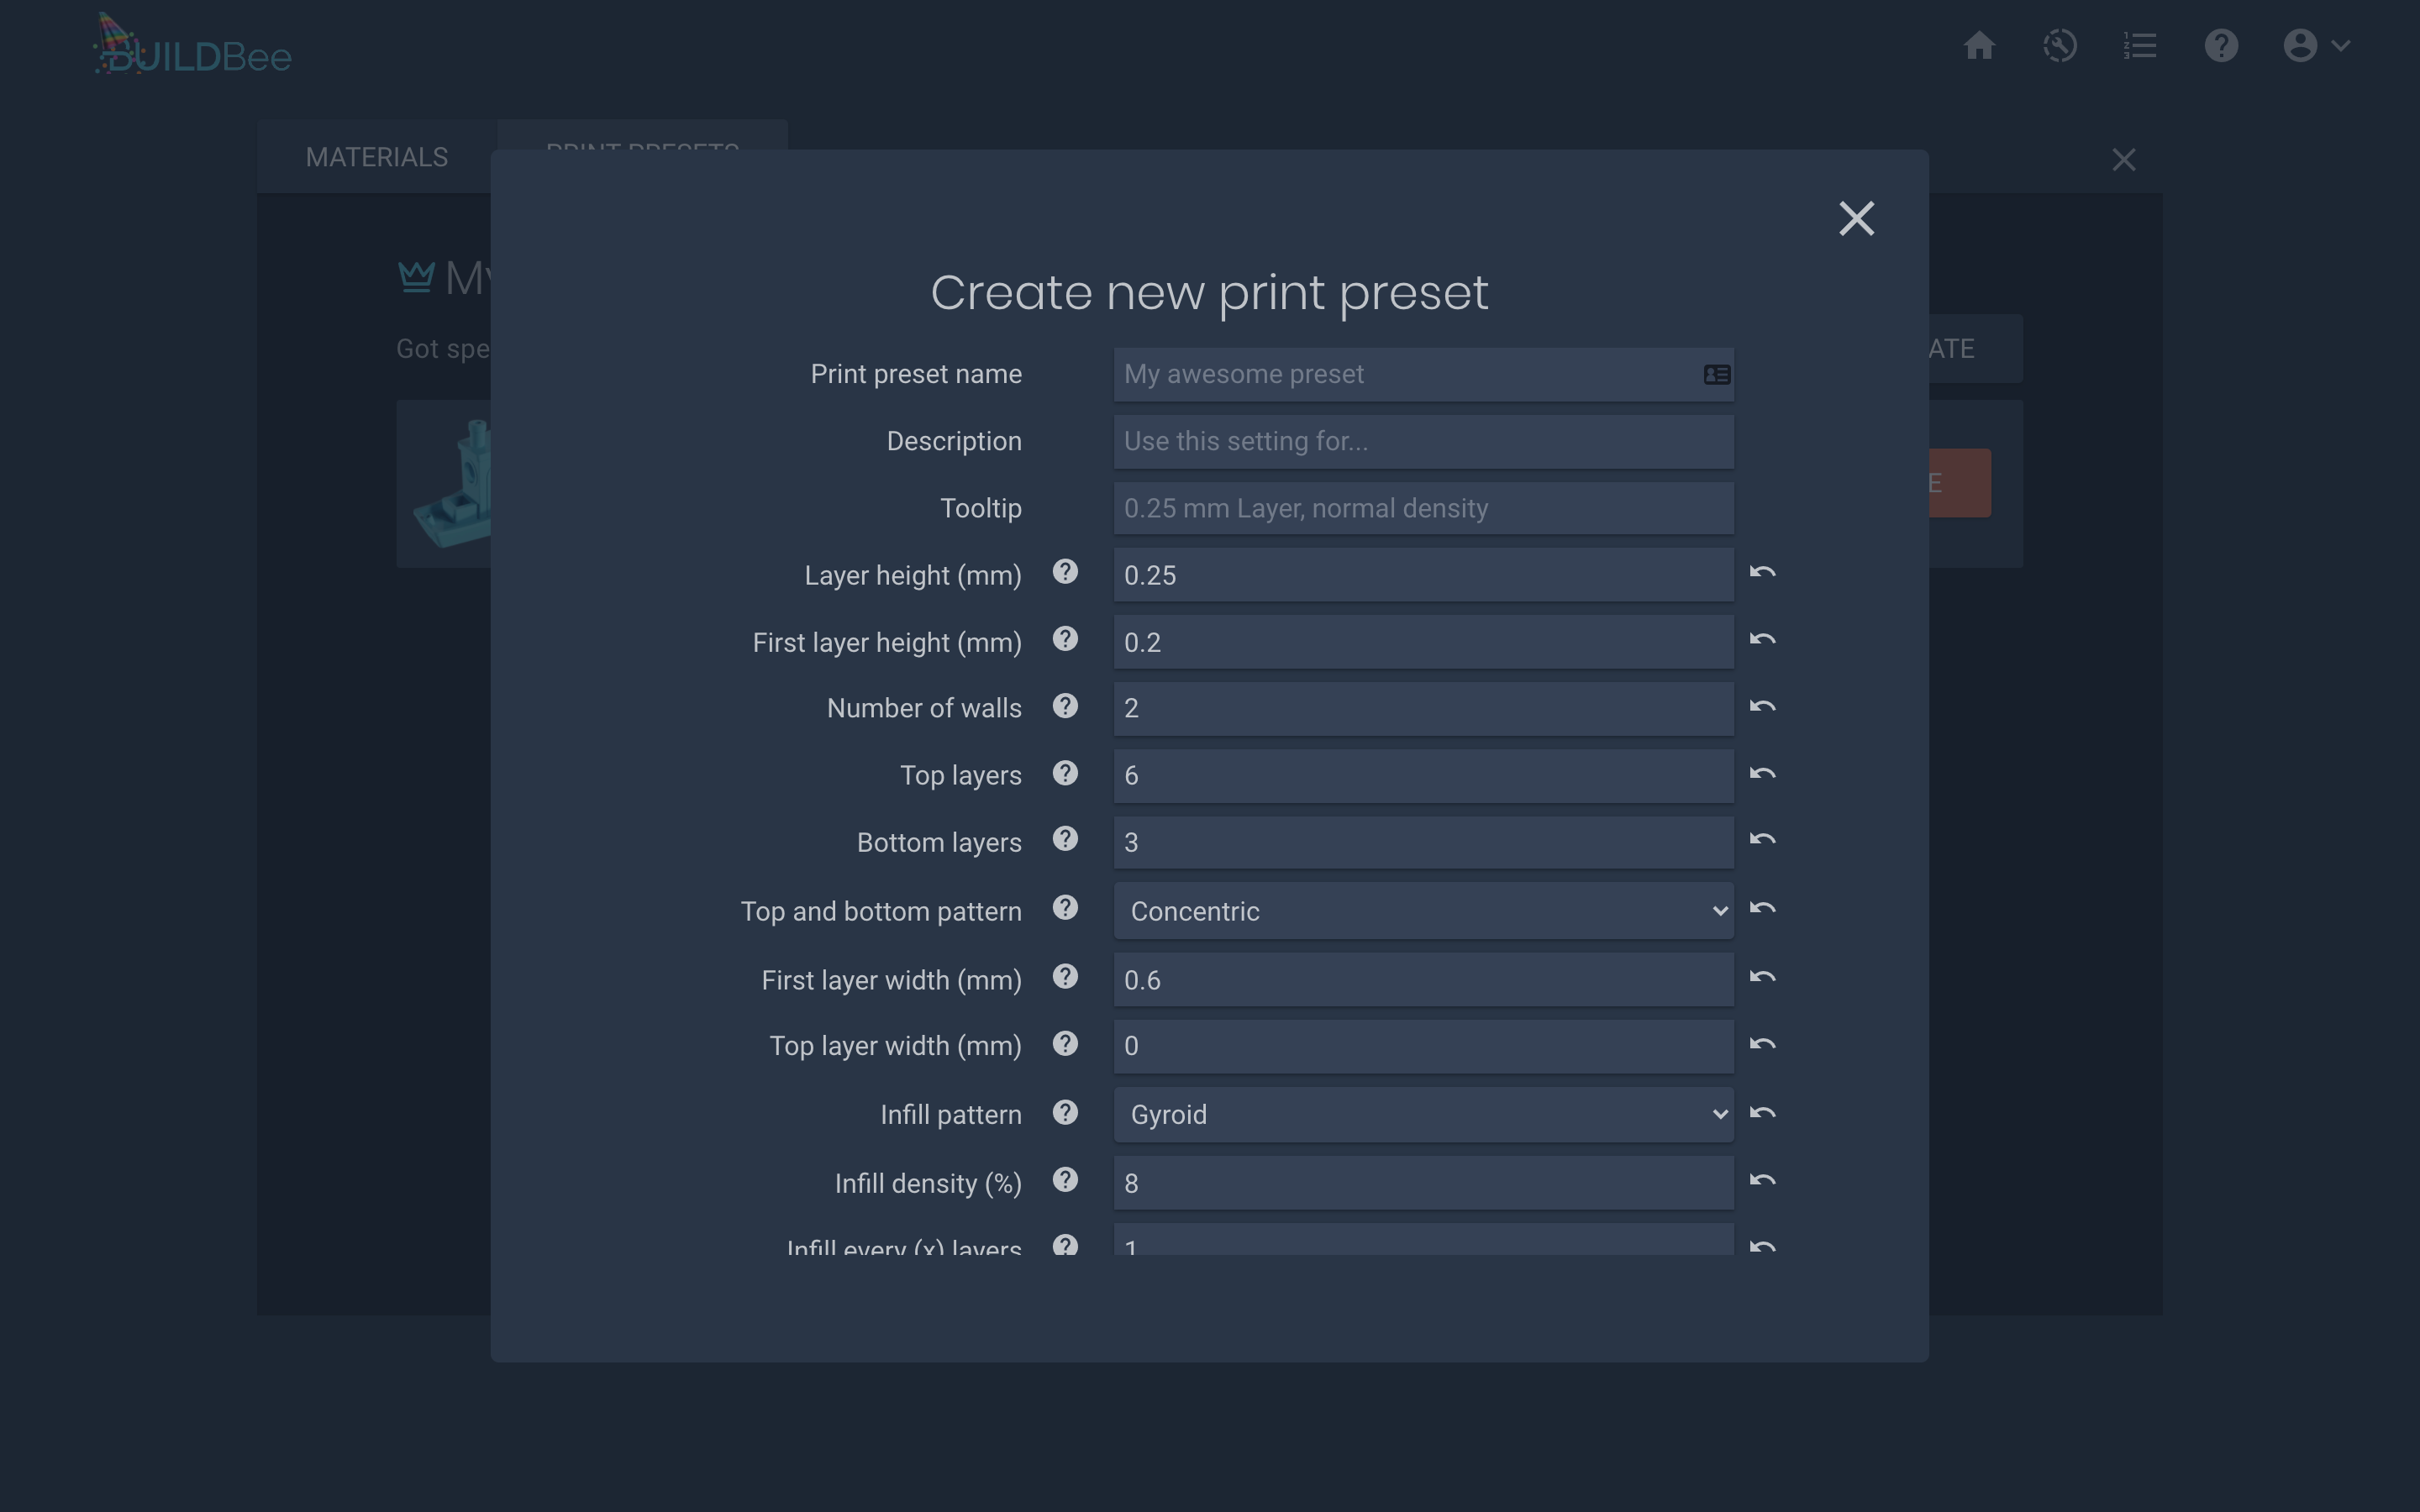 BuildBee’s printing presets allow users to set up and their preferences